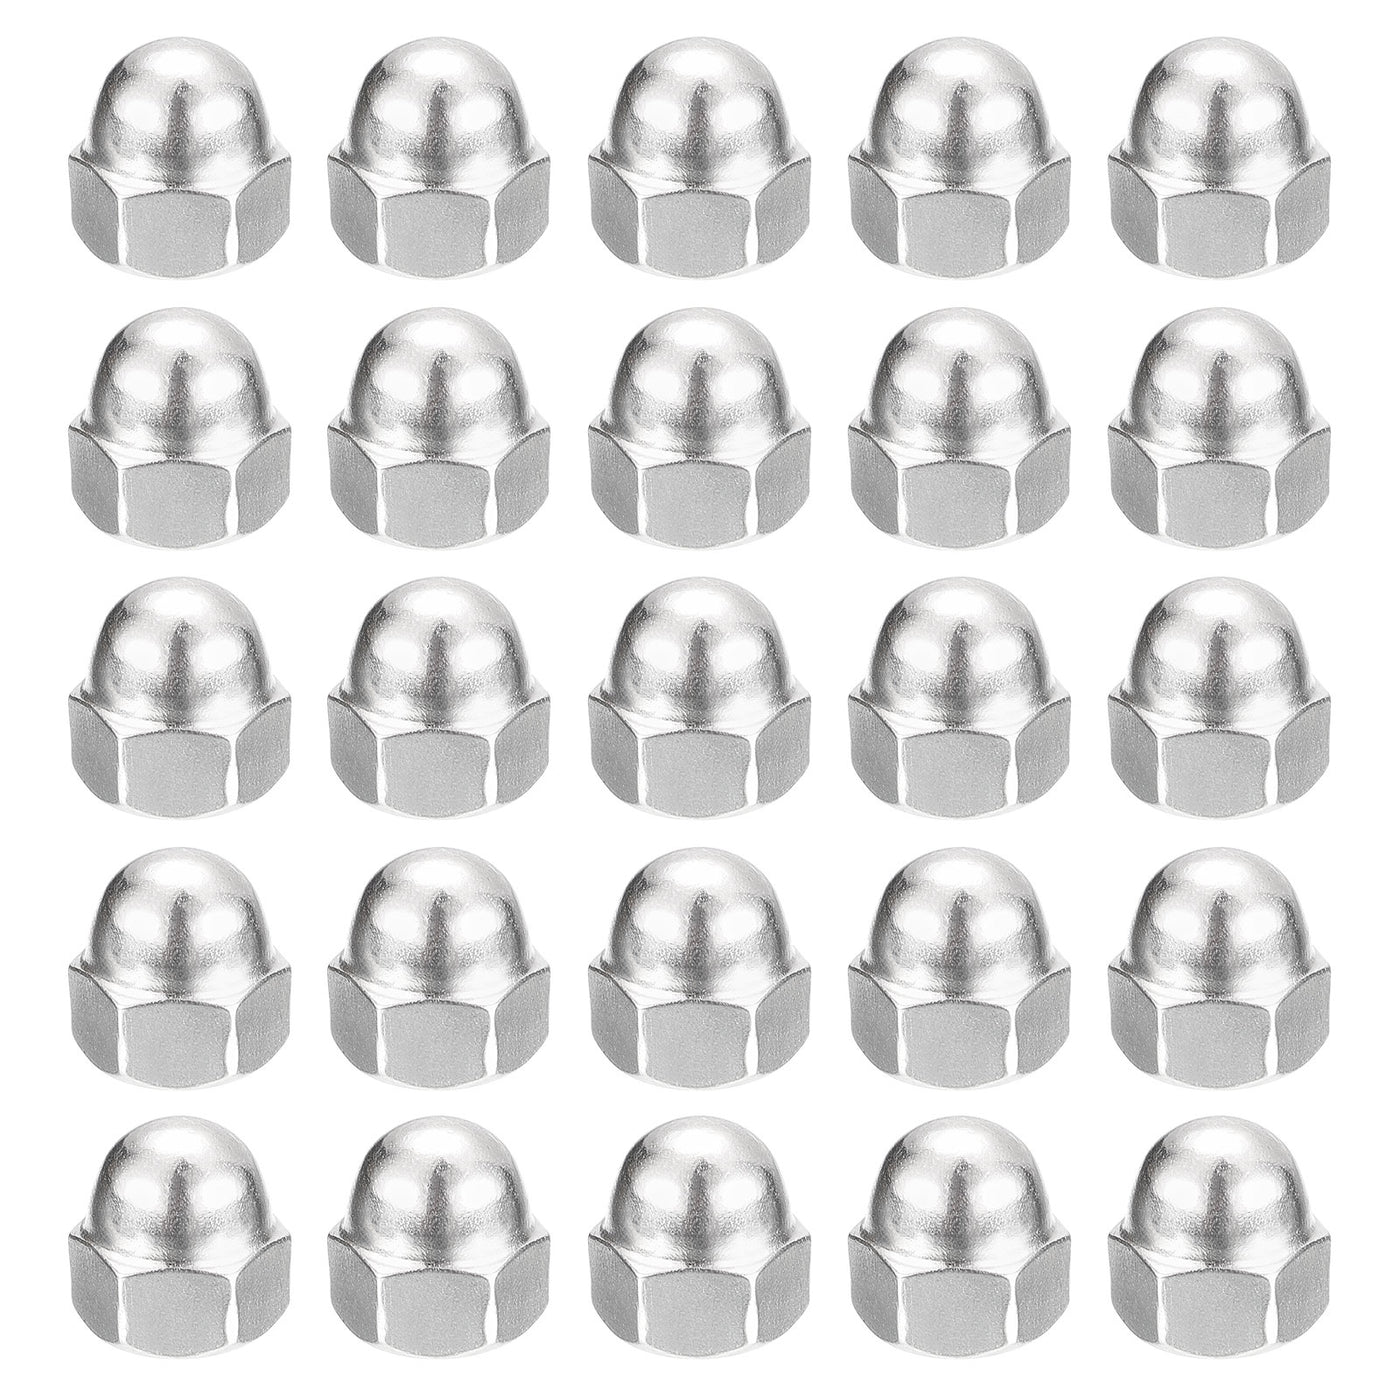 uxcell Uxcell 1/4-20 Acorn Cap Nuts,25pcs - 304 Stainless Steel Hardware Nuts, Acorn Hex Cap Dome Head Nuts for Fasteners (Silver)